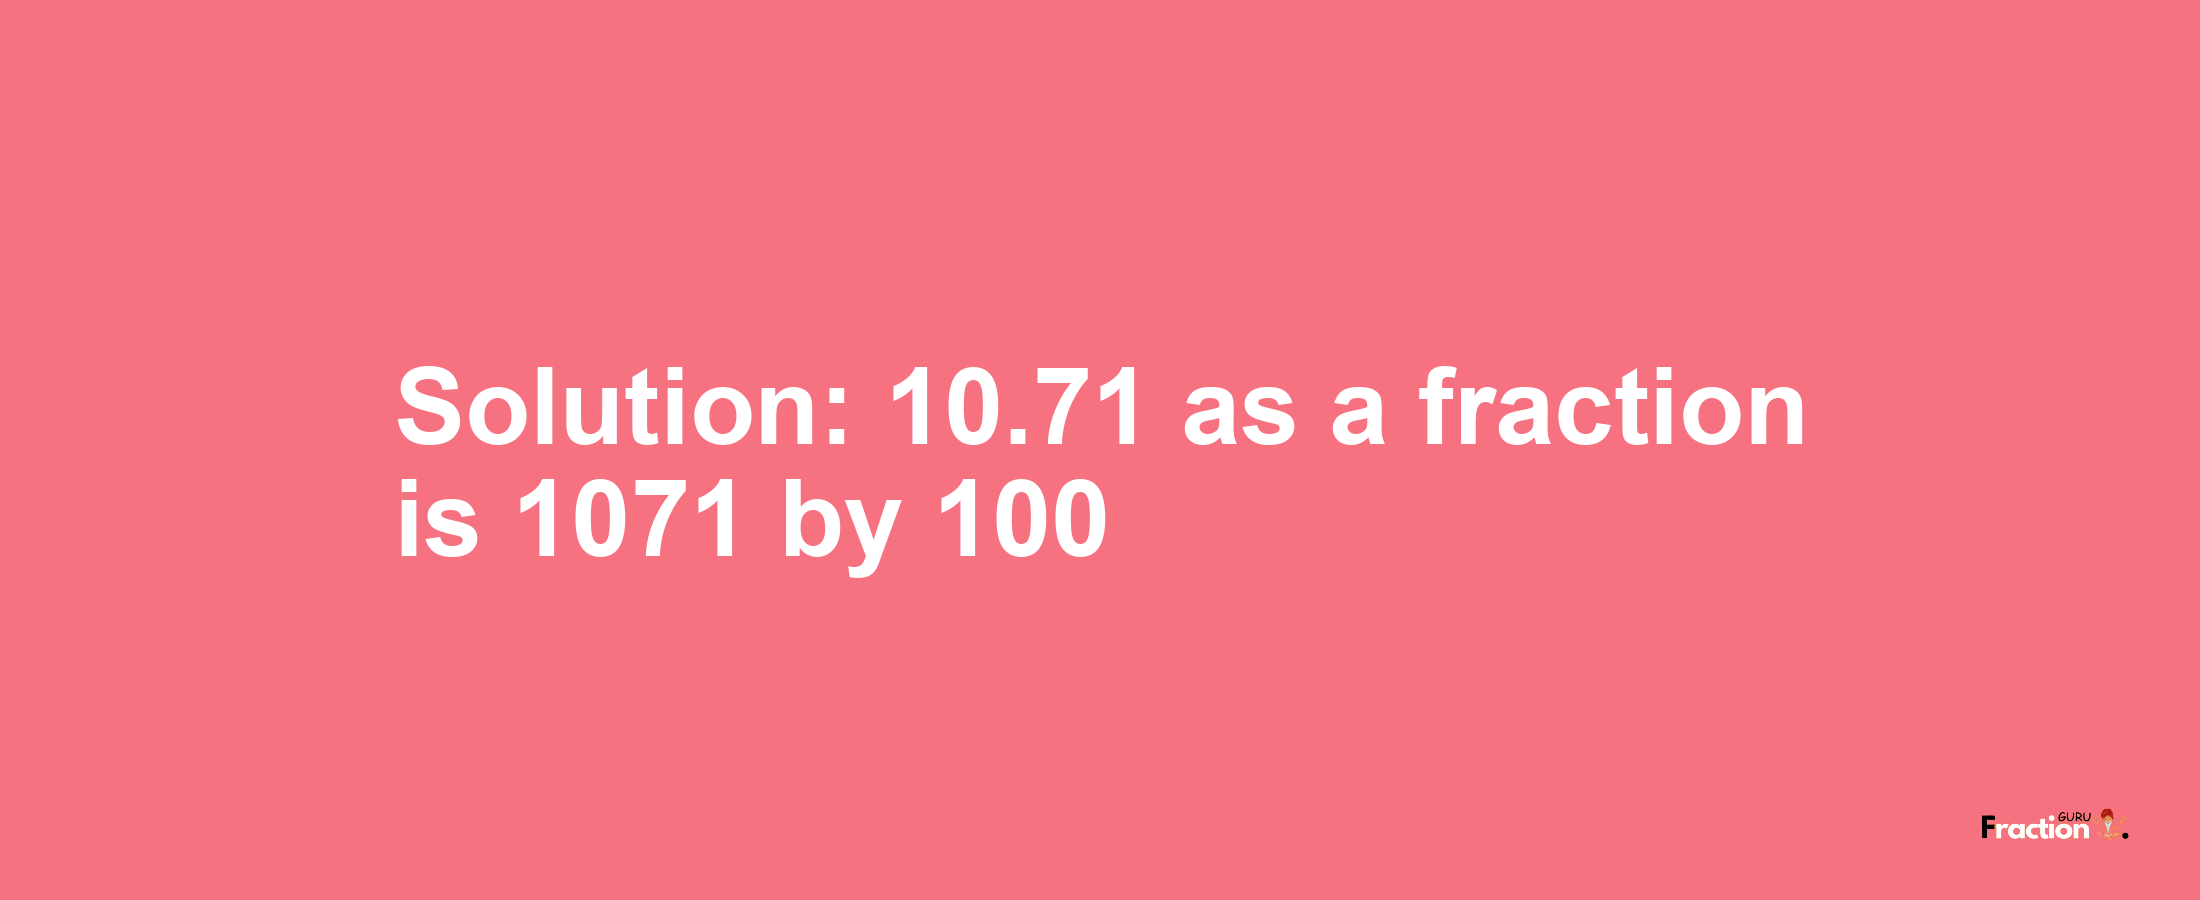 Solution:10.71 as a fraction is 1071/100